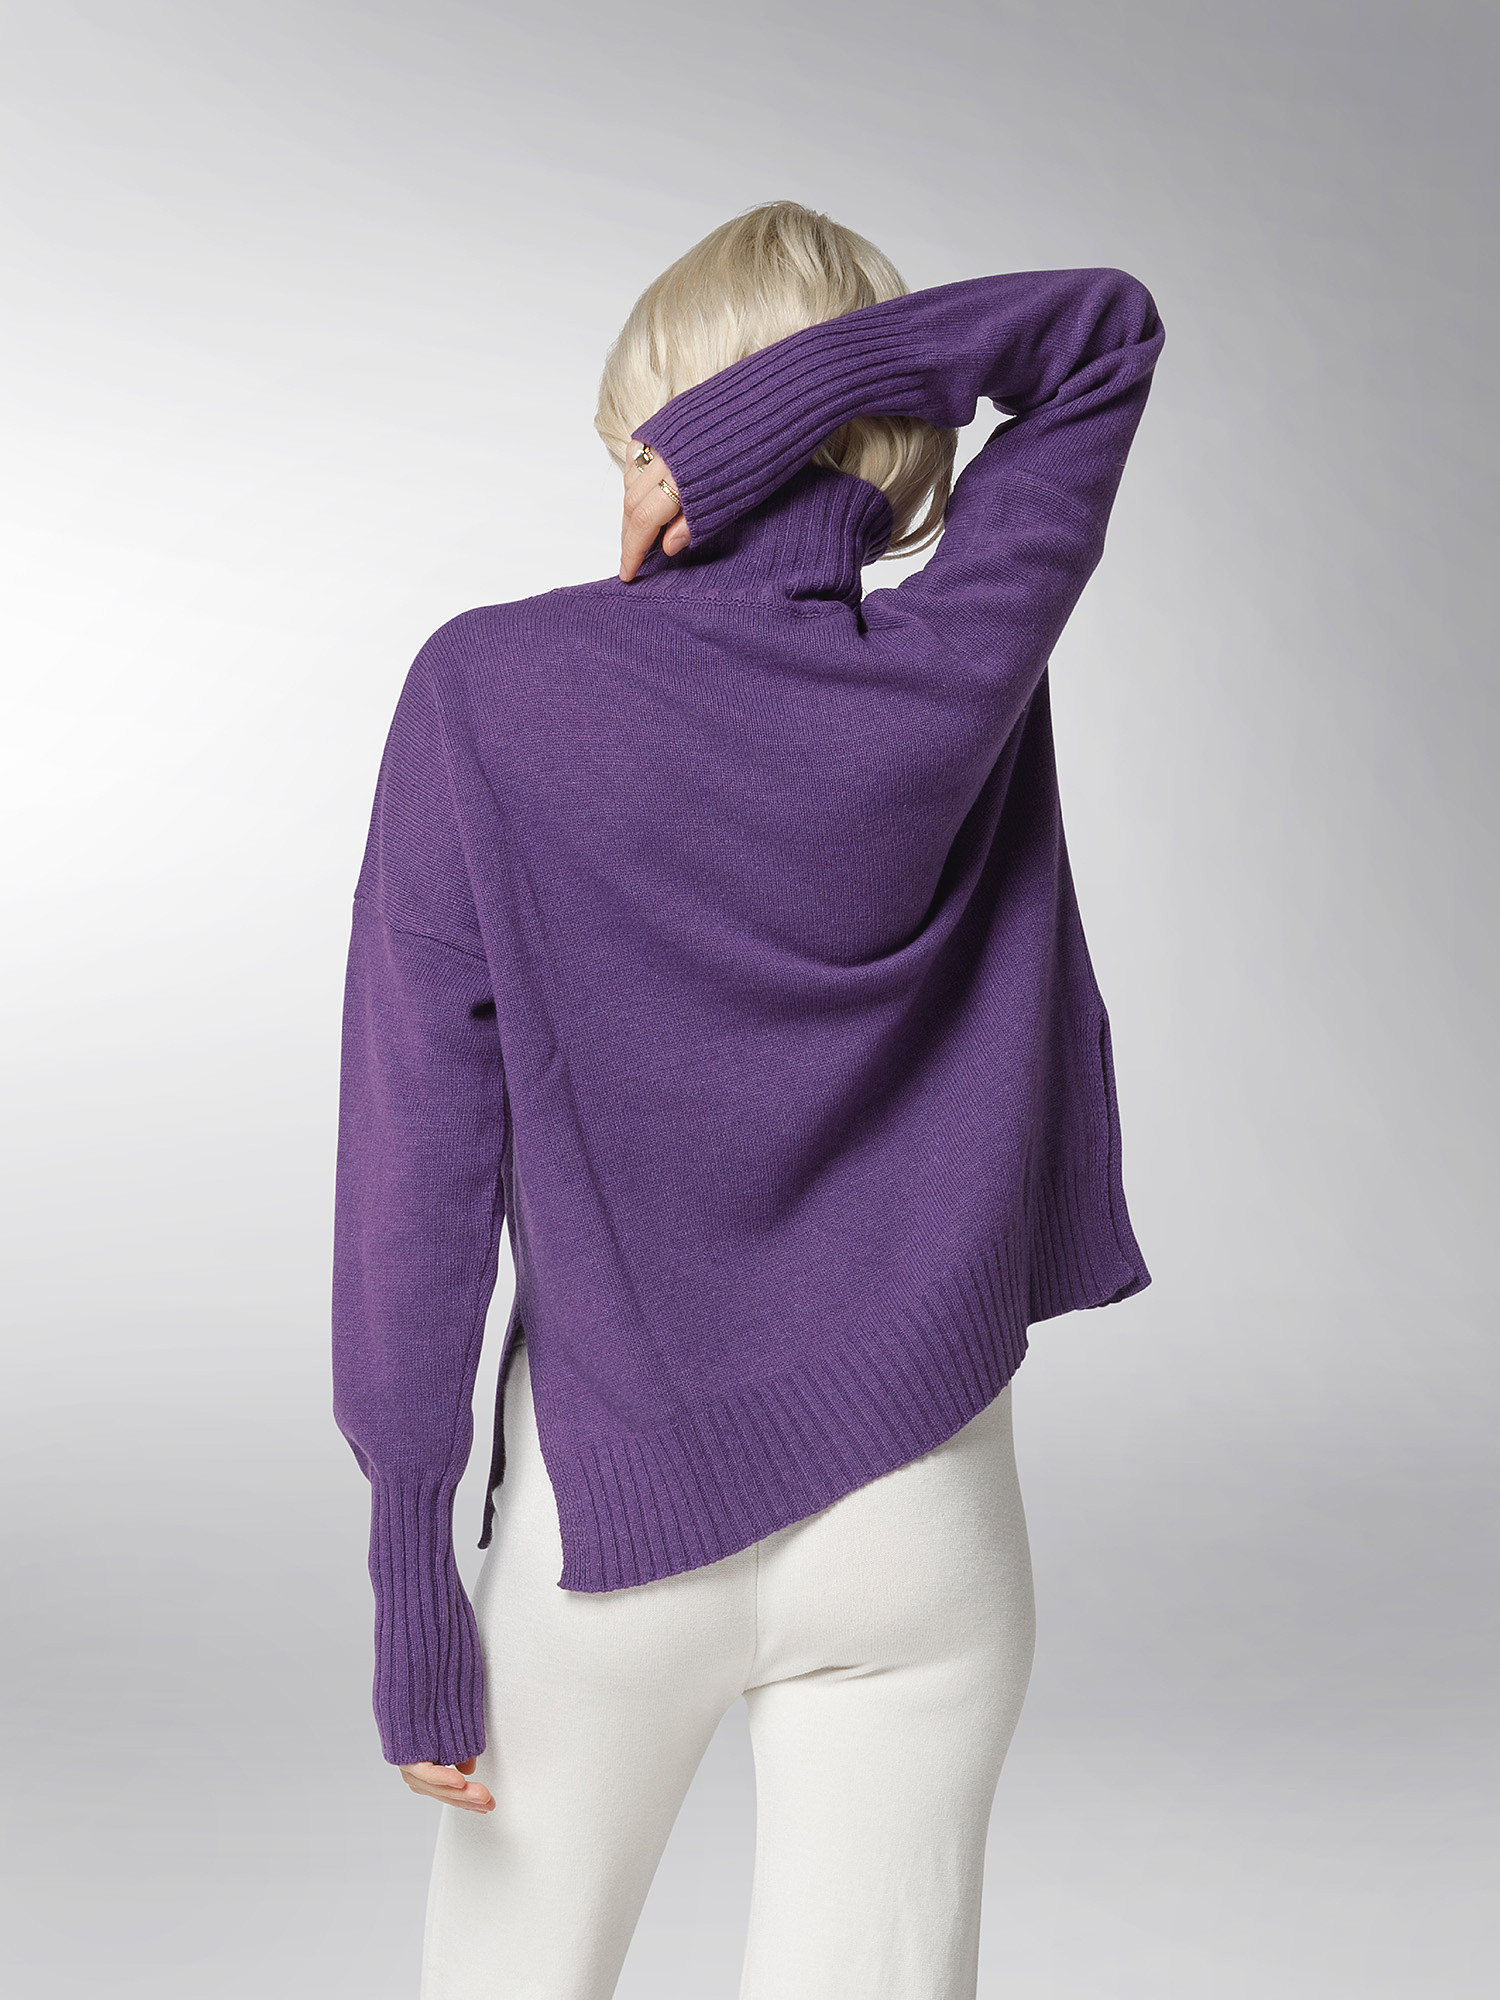 K Collection - Maglia collo a cratere, Viola, large image number 4